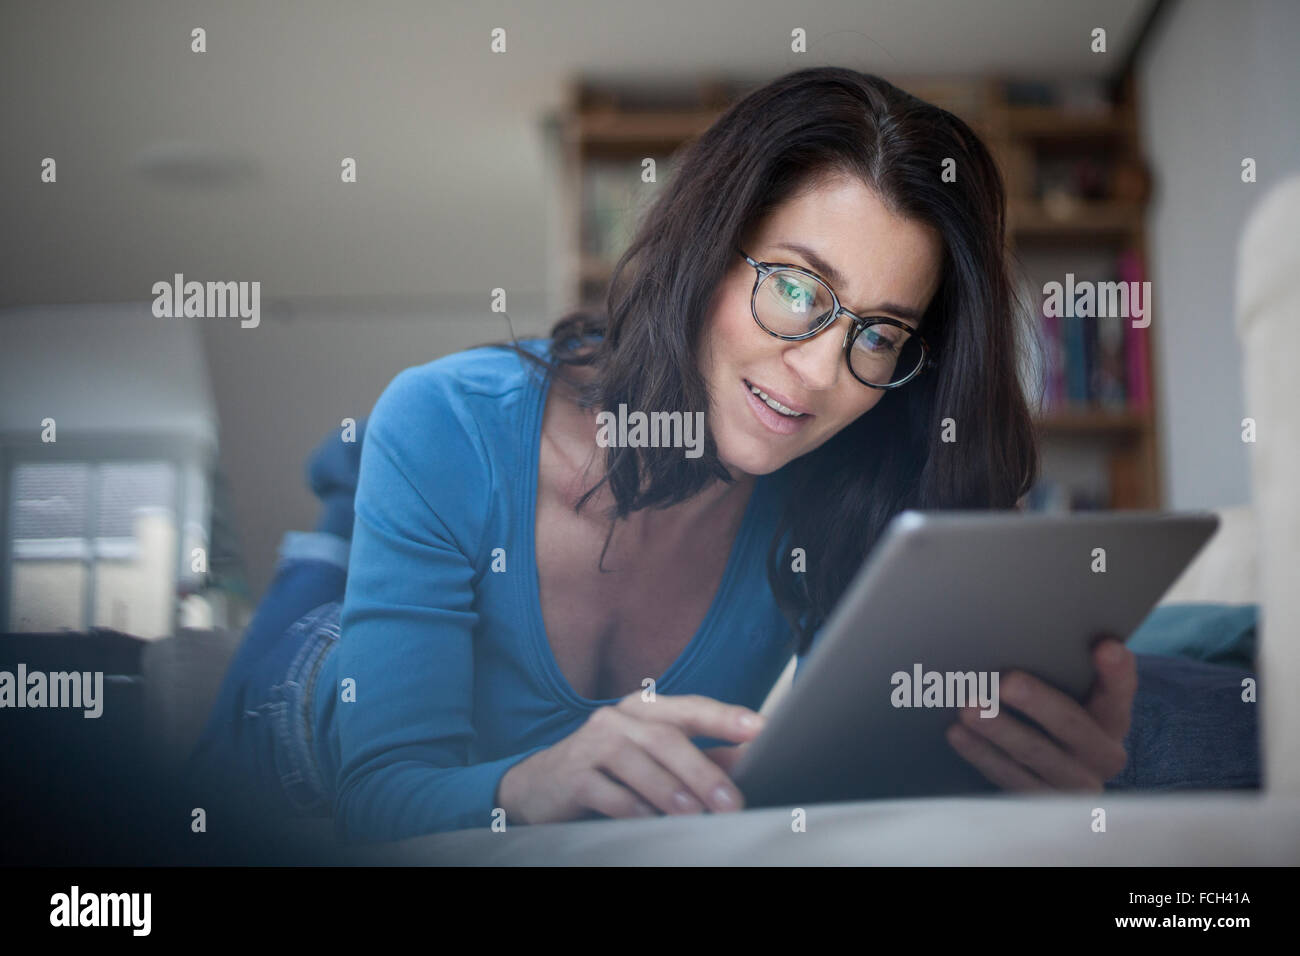 Woman at home using digital tablet Stock Photo